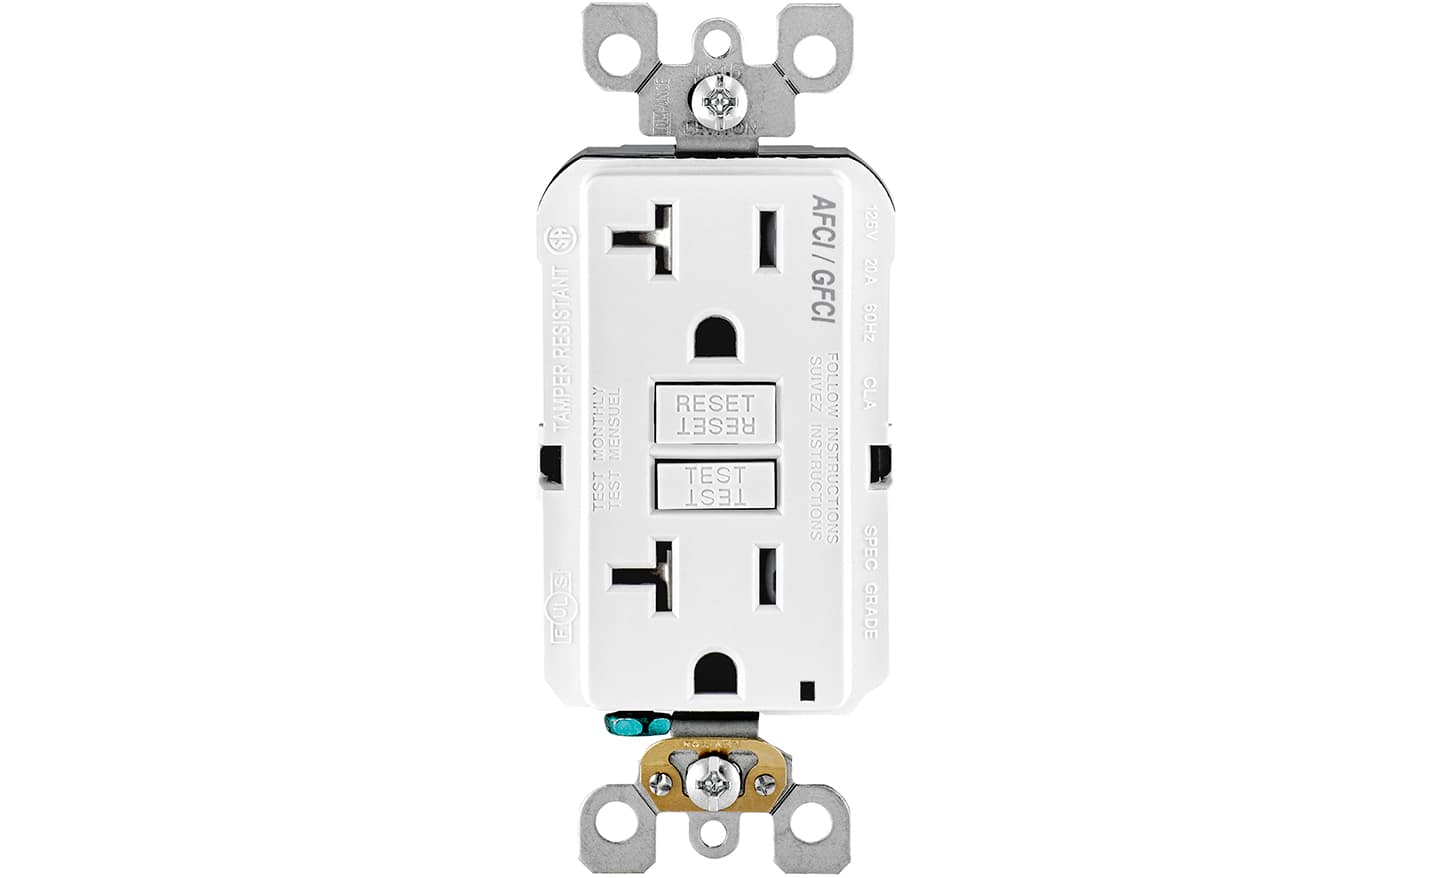 A split circuit receptacle shown against a white background.